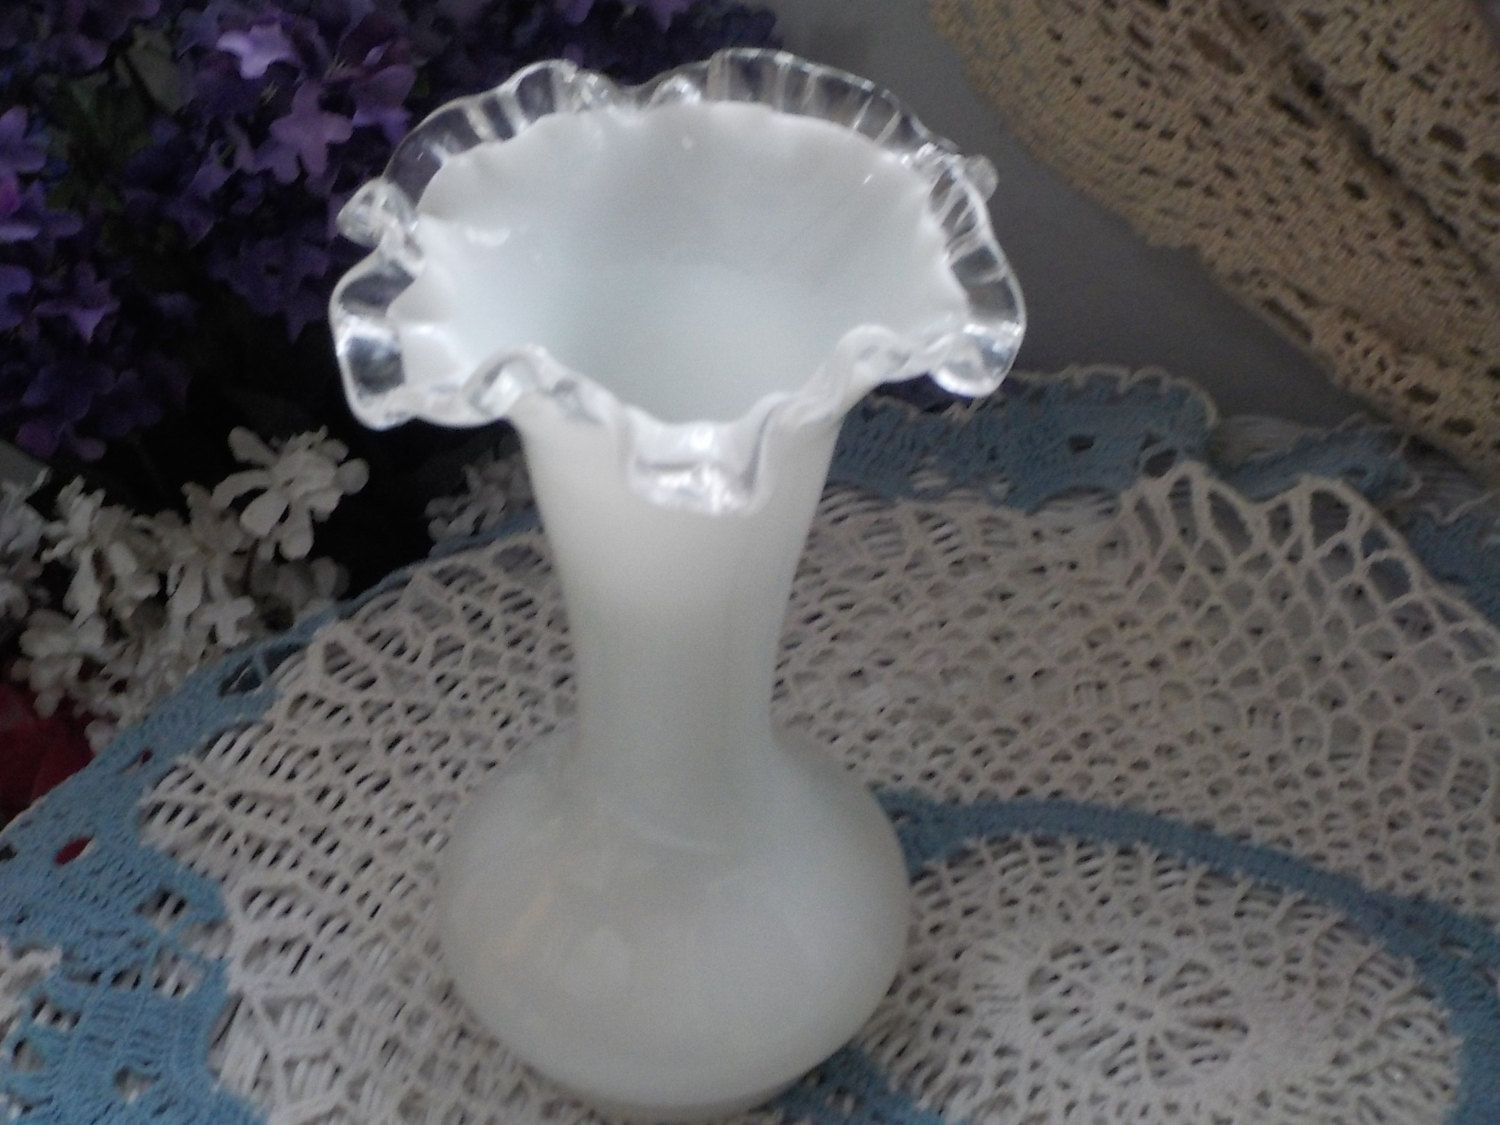 27 Lovable Milk Glass Vases for Sale 2024 free download milk glass vases for sale of ruffled vase fenton glass silver crest tall milk glass a little intended for ruffled vase fenton glass silver crest tall milk glass a little over 8 inches tall 4